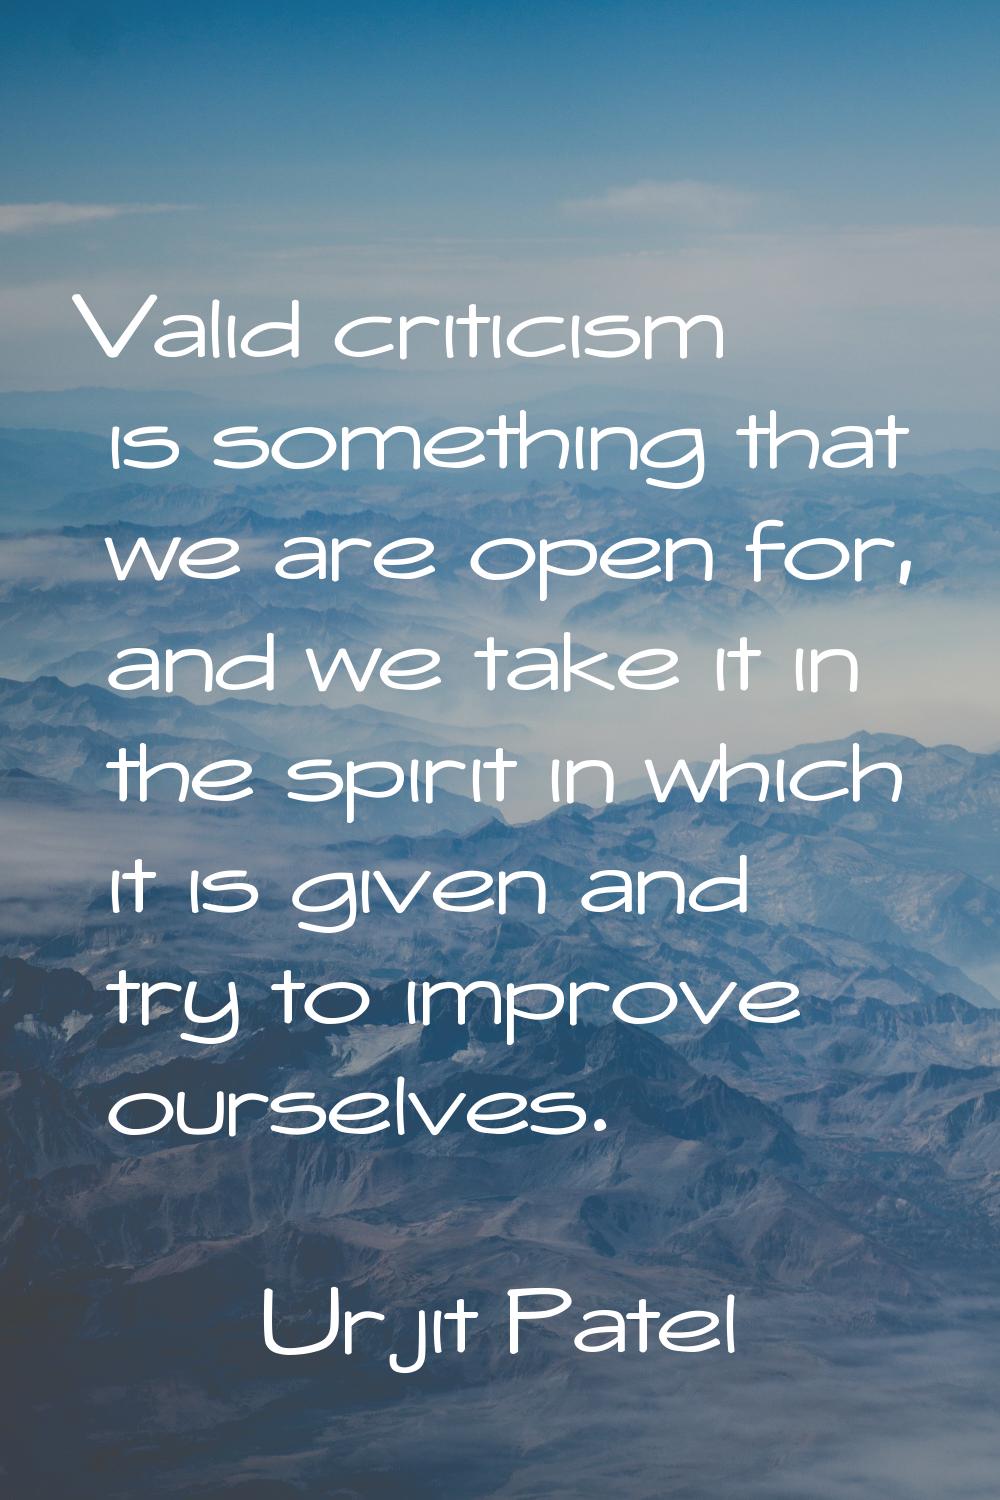 Valid criticism is something that we are open for, and we take it in the spirit in which it is give